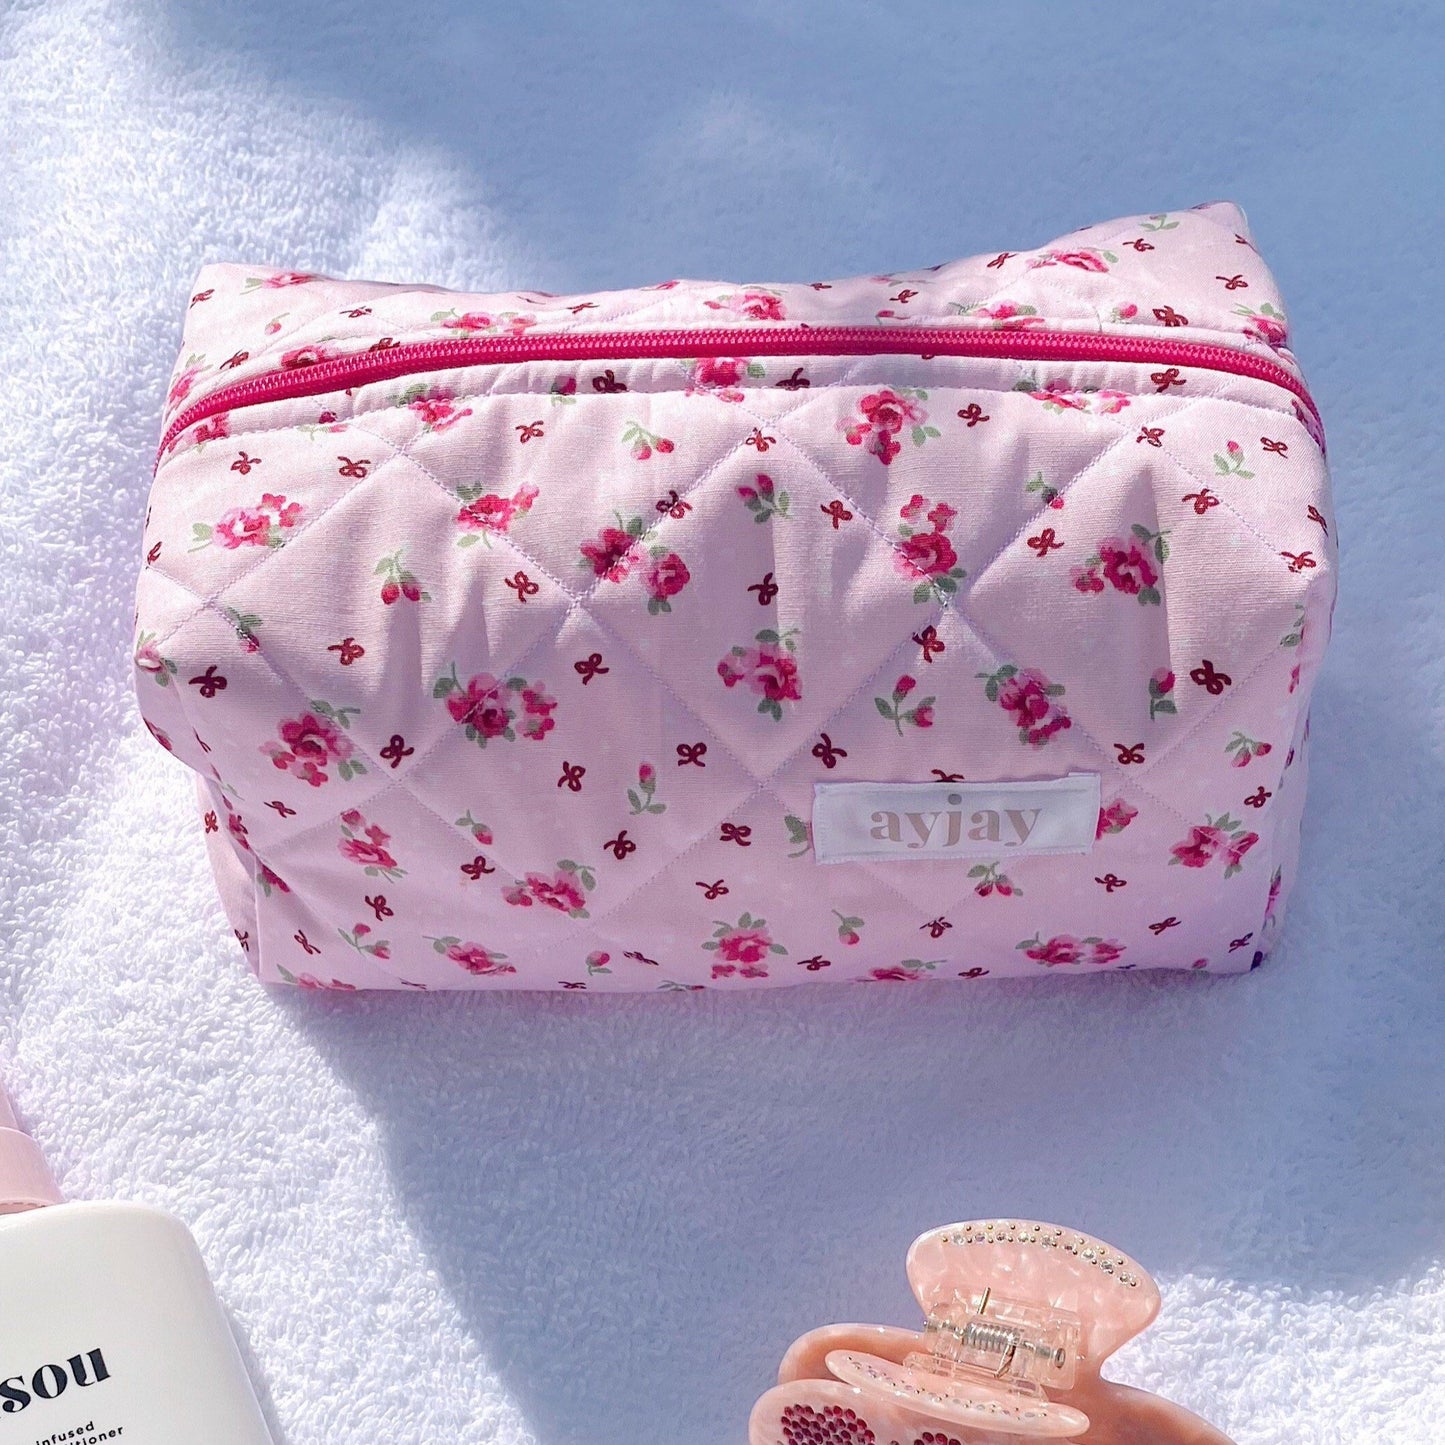 CUTE PINK COQUETTE FLORAL MAKEUP TOILETRY TRAVEL BAG